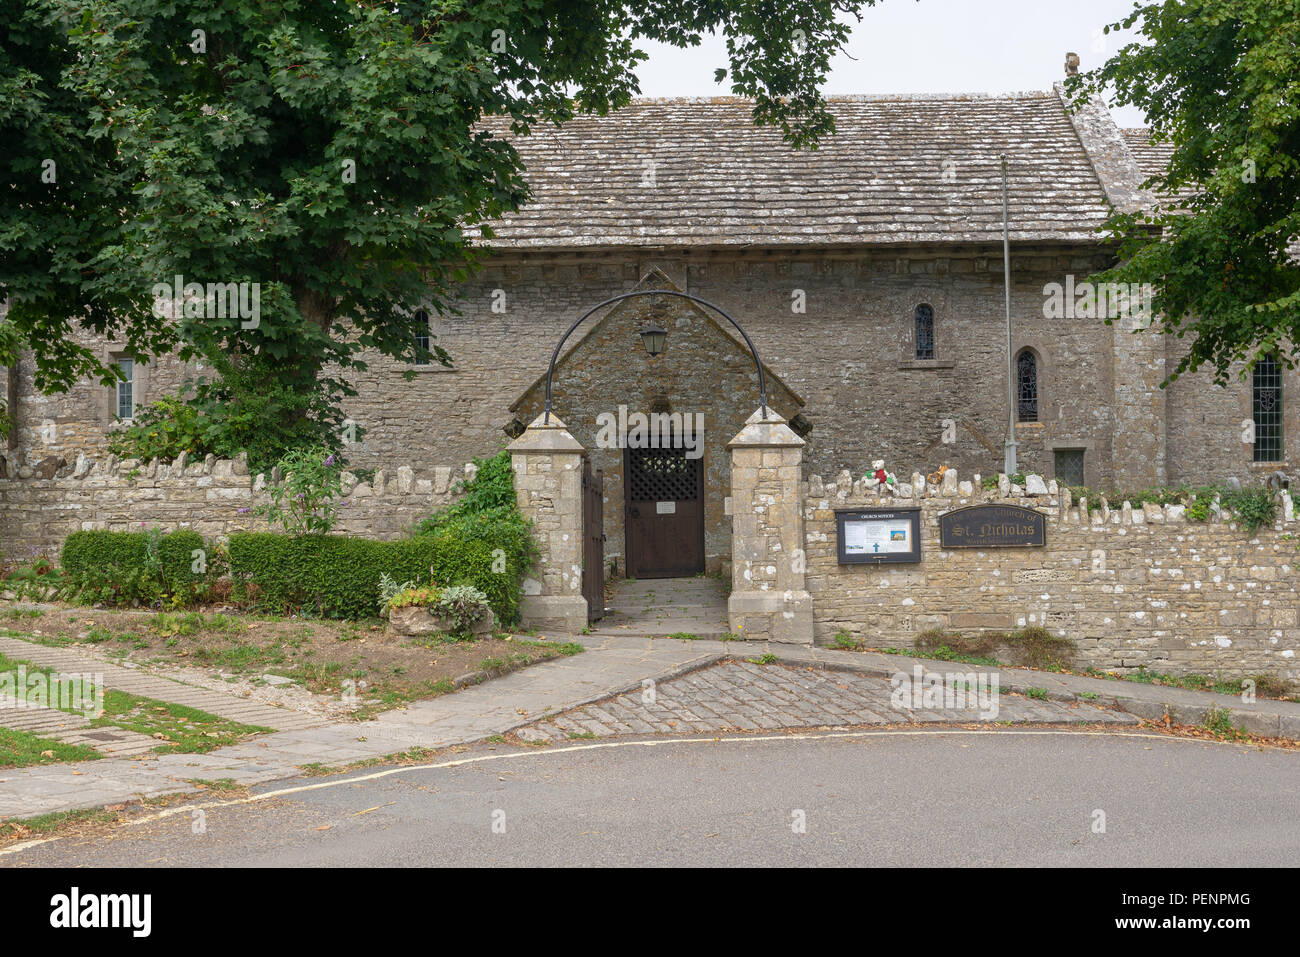 The church of St. Nicolas in the village of Worth Matravers, Purbeck, Dorset, UK Stock Photo